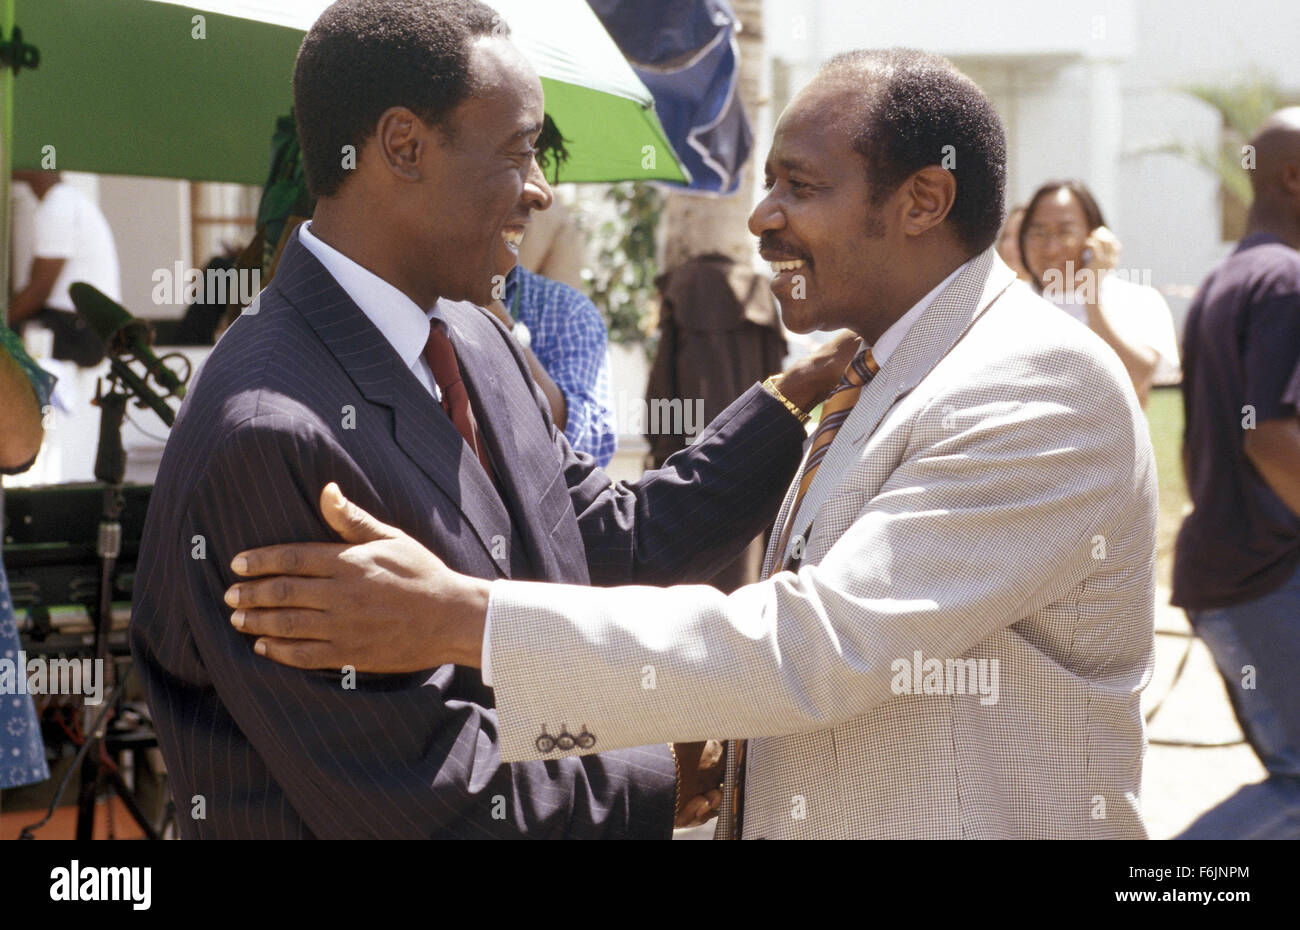 RELEASE DATE: February 4, 2005. MOVIE TITLE: Hotel Rwanda. STUDIO: United Artists. PLOT: The true-life story of Paul Rusesabagina, a hotel manager who housed over a thousand Tutsi refugees during their struggle against the Hutu militia in Rwanda. PICTURED: DON CHEADLE greets PAUL RUSESABAGINA on the set. Stock Photo